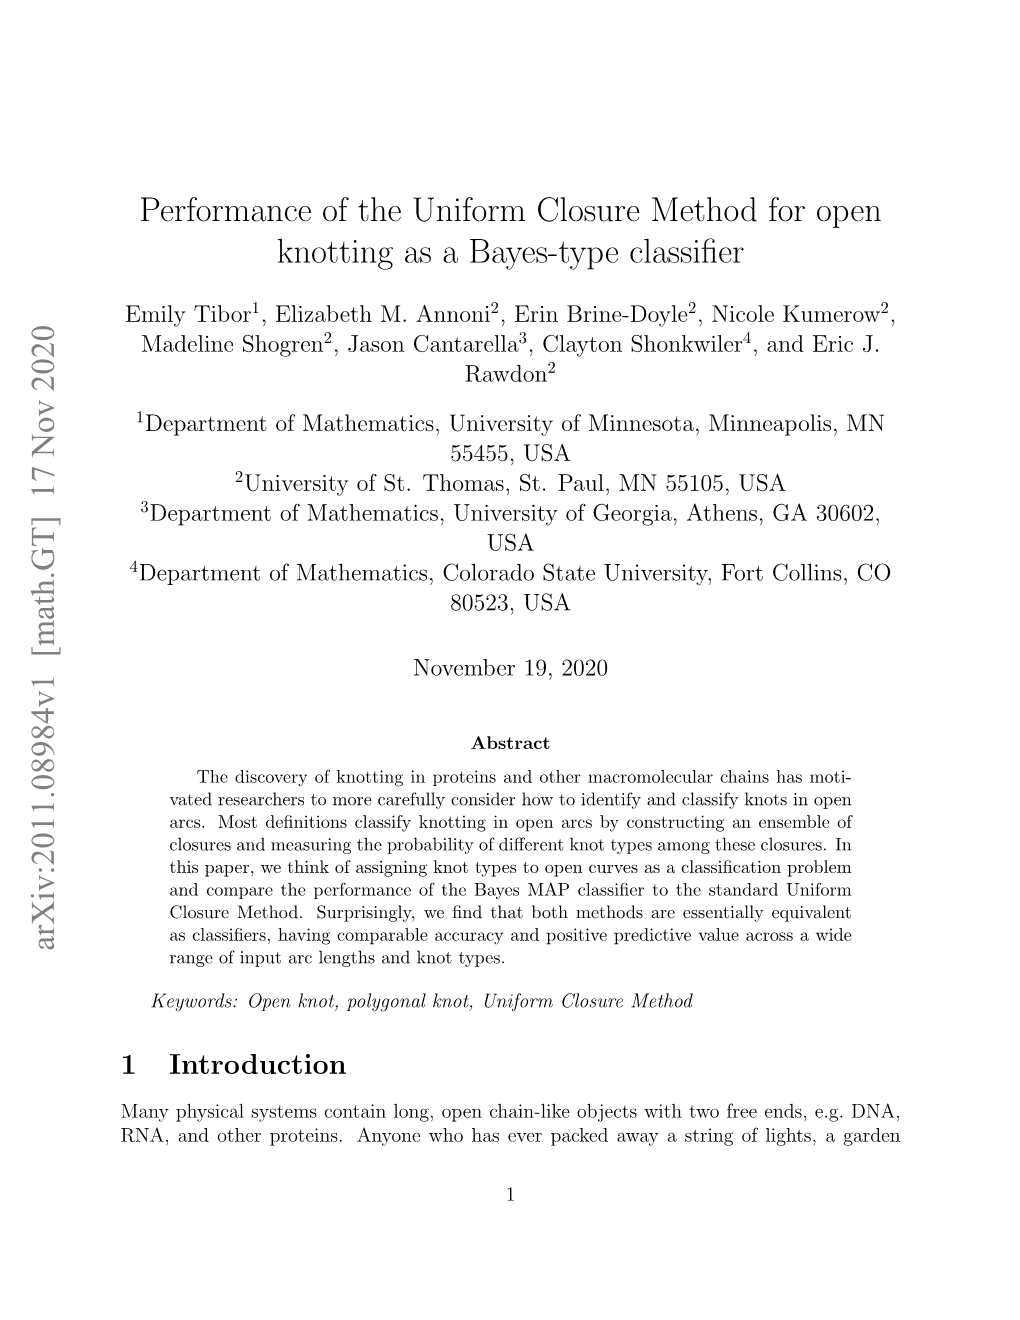 Performance of the Uniform Closure Method for Open Knotting As a Bayes-Type Classifier Arxiv:2011.08984V1 [Math.GT] 17 Nov